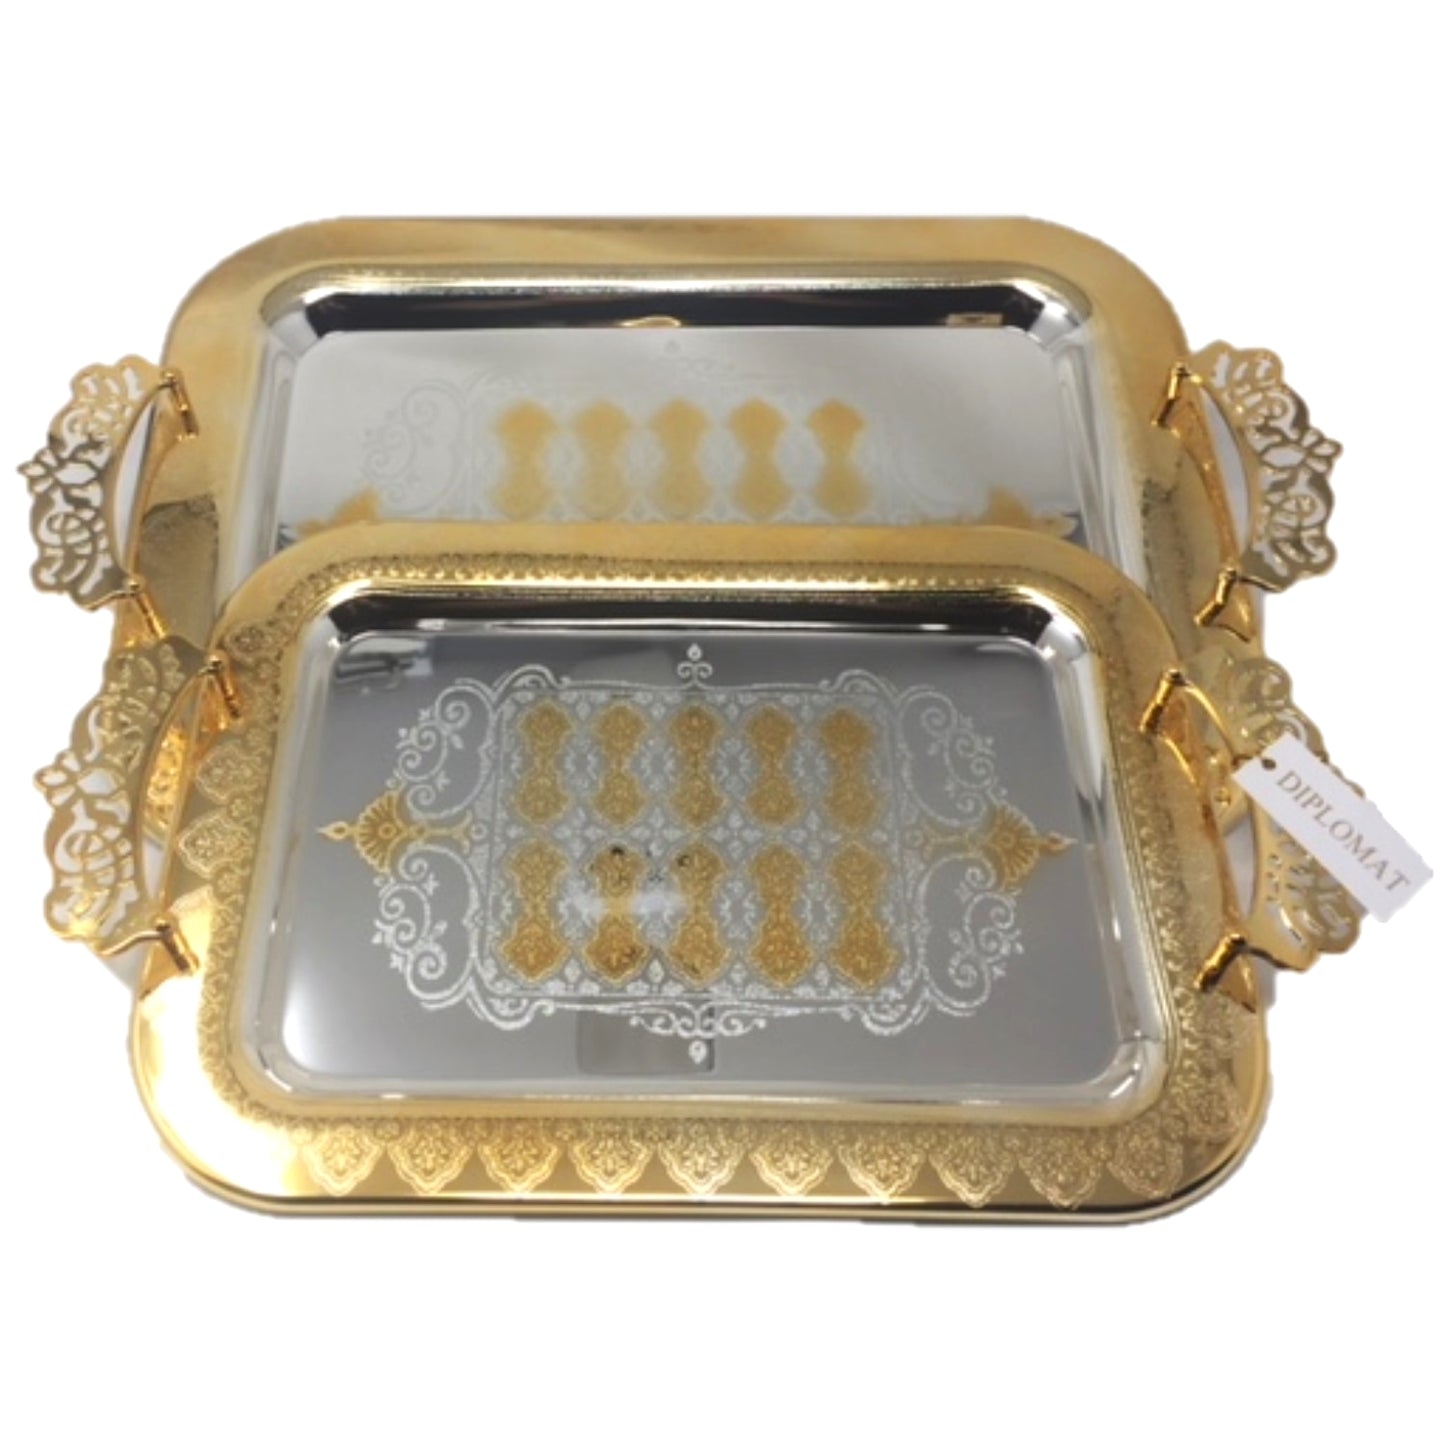 2 PC Serving Tea Tray Set Gold Handle and Accents Chrome Plated